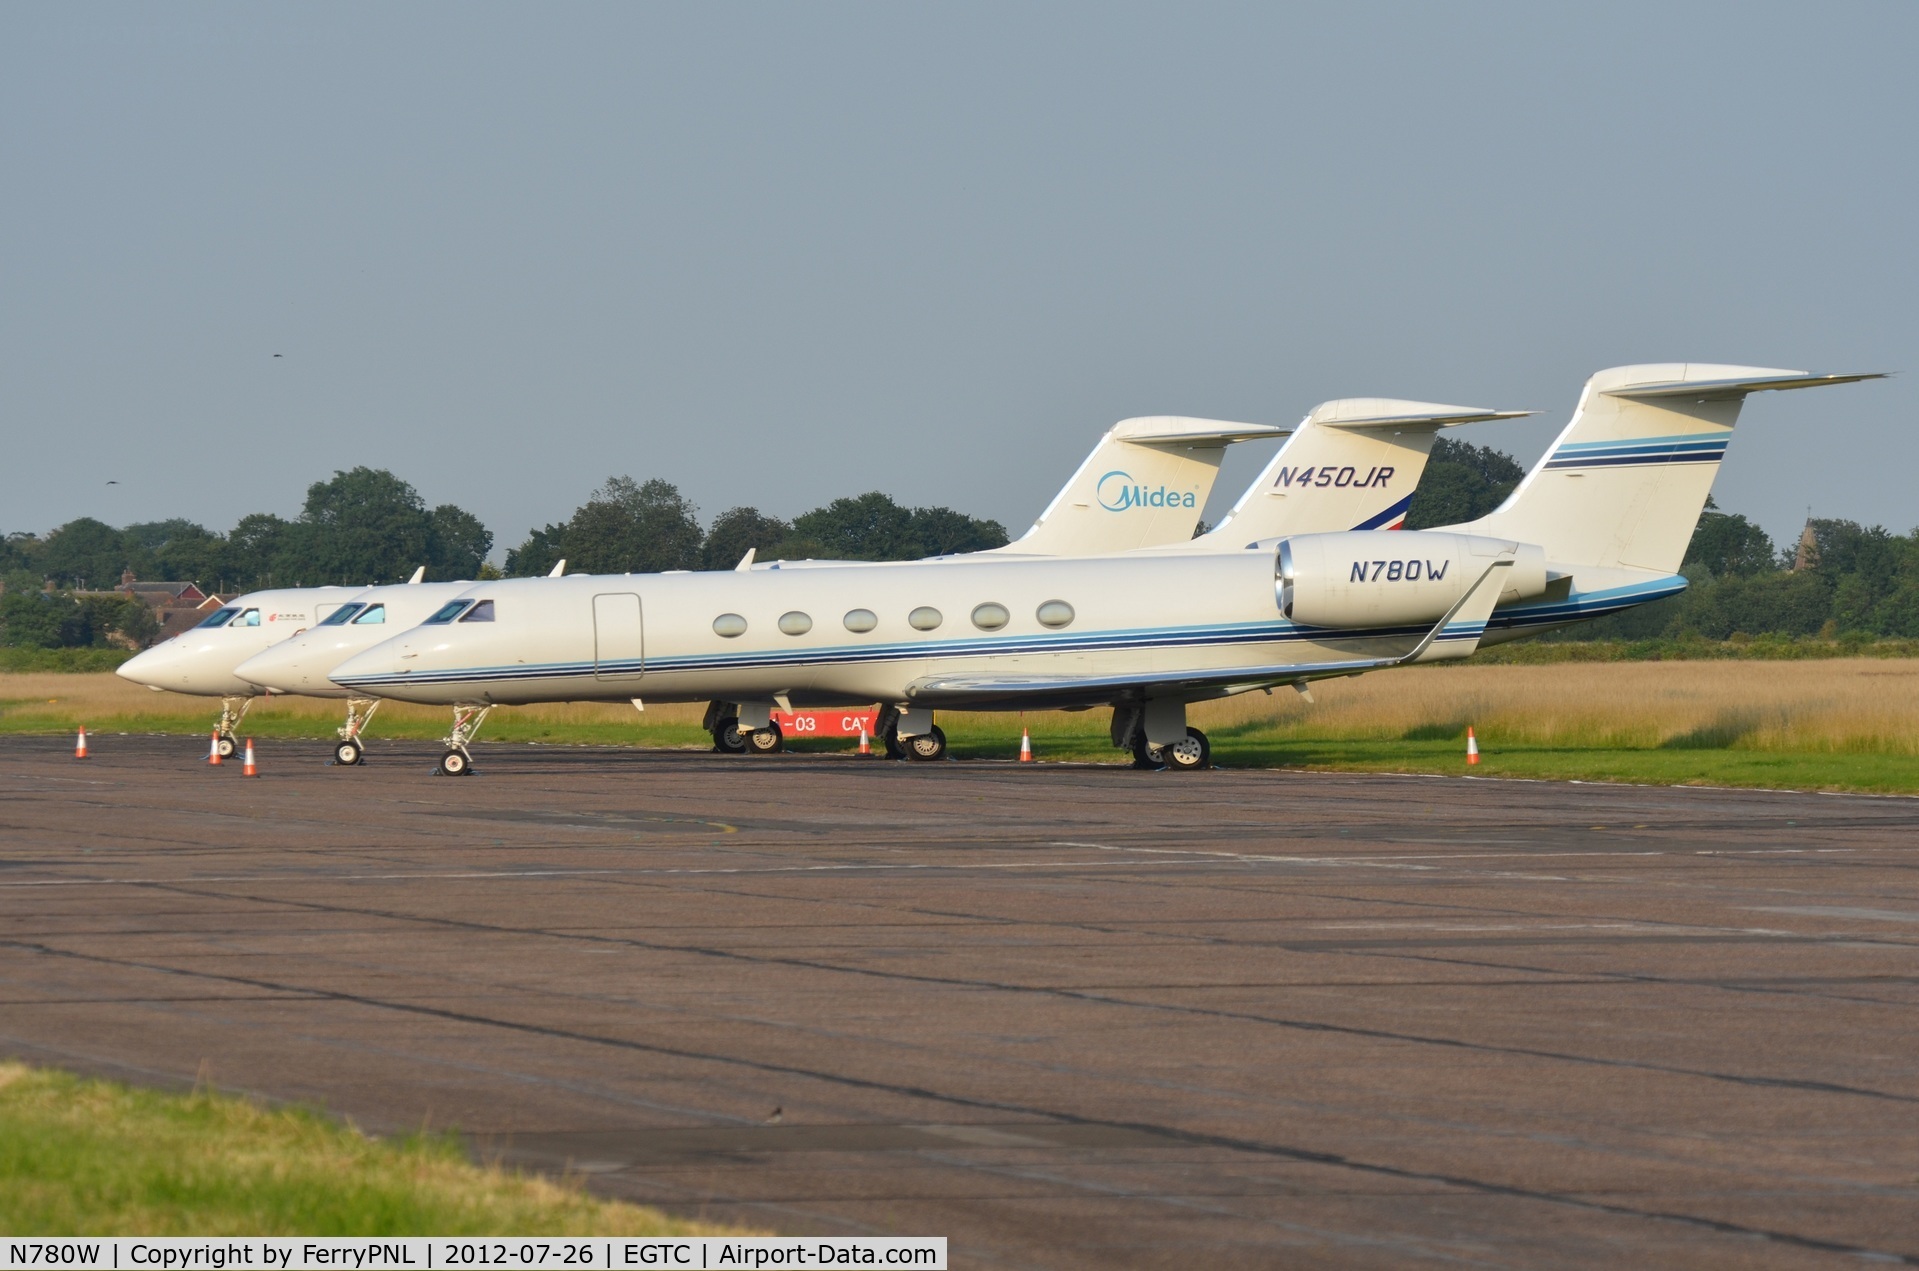 N780W, 1997 Gulfstream Aerospace G-V C/N 530, A few of the aircraft parked at Cranfield . These aircraft came from Luton and were ferried to Cranfield due to capacity reasons because of the Olympics 2012 opening ceremony next day.